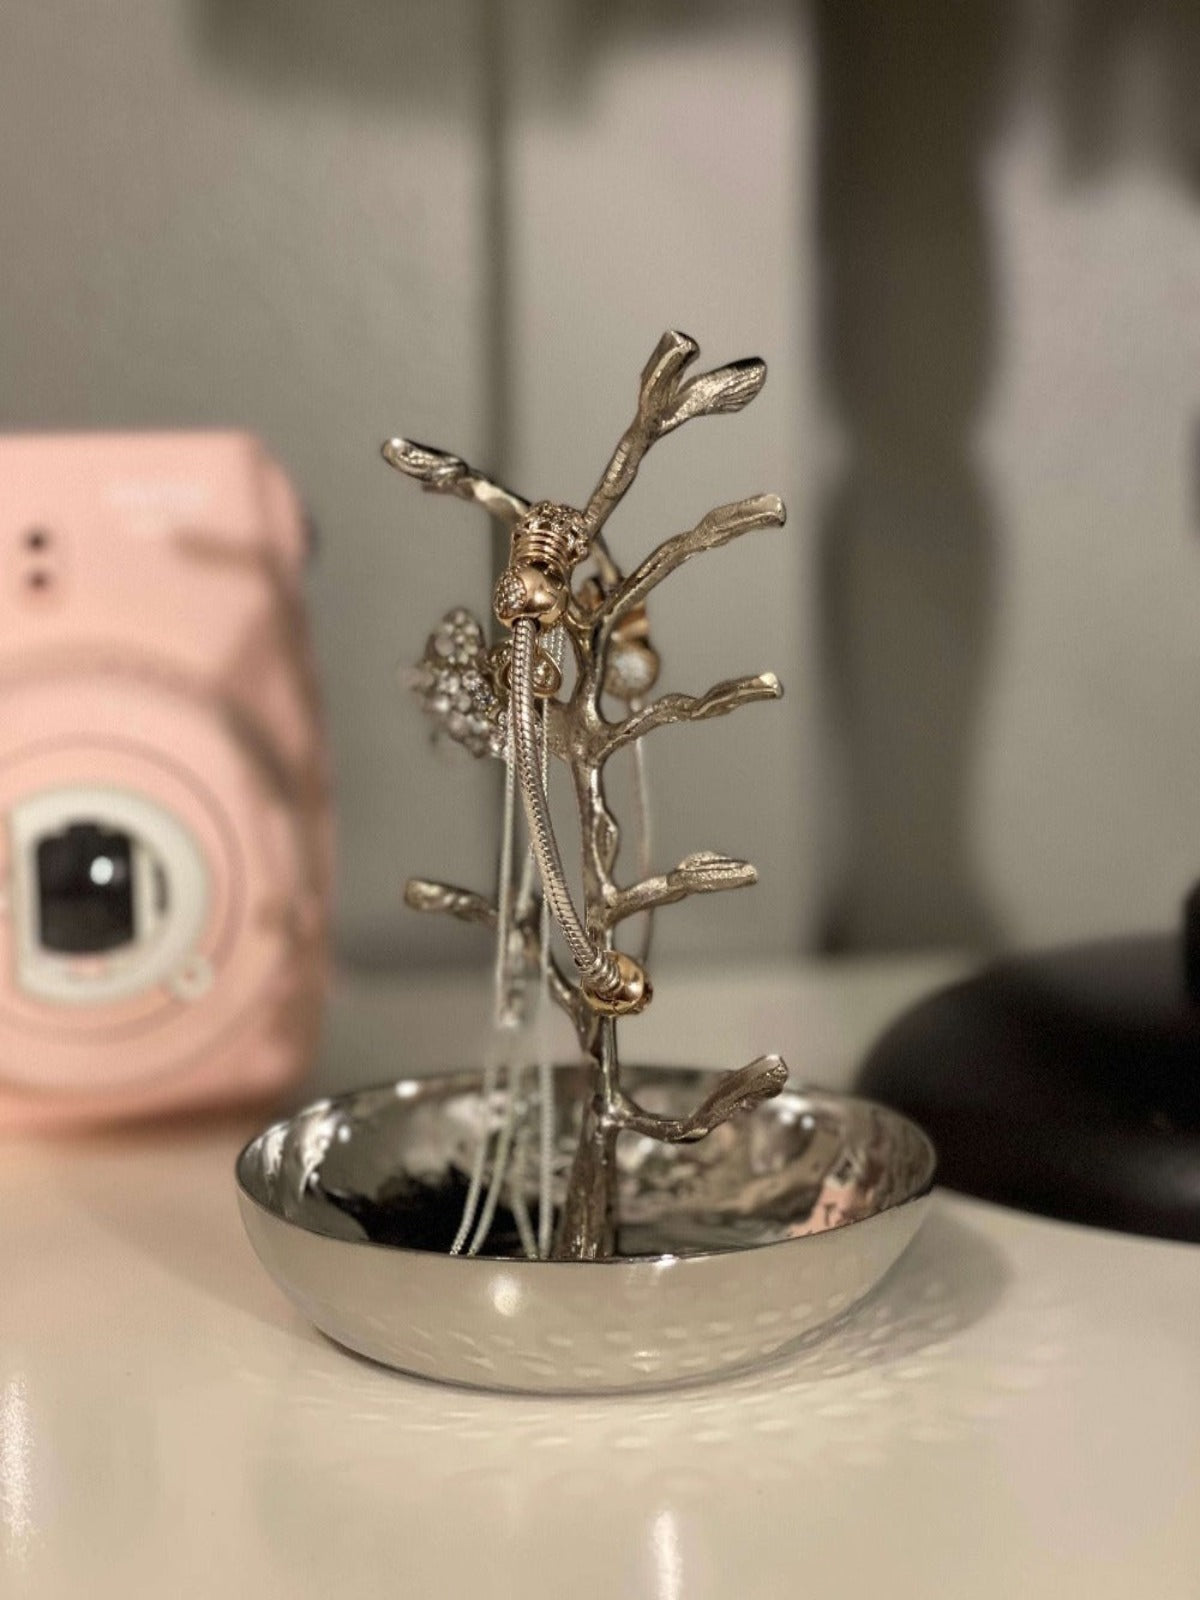 The Ayla Jewelry Holder With Silver Flower design is perfect for displaying your favorite jewelry. The leafless twig style creates a delicate and classy look with a touch of sophistication.